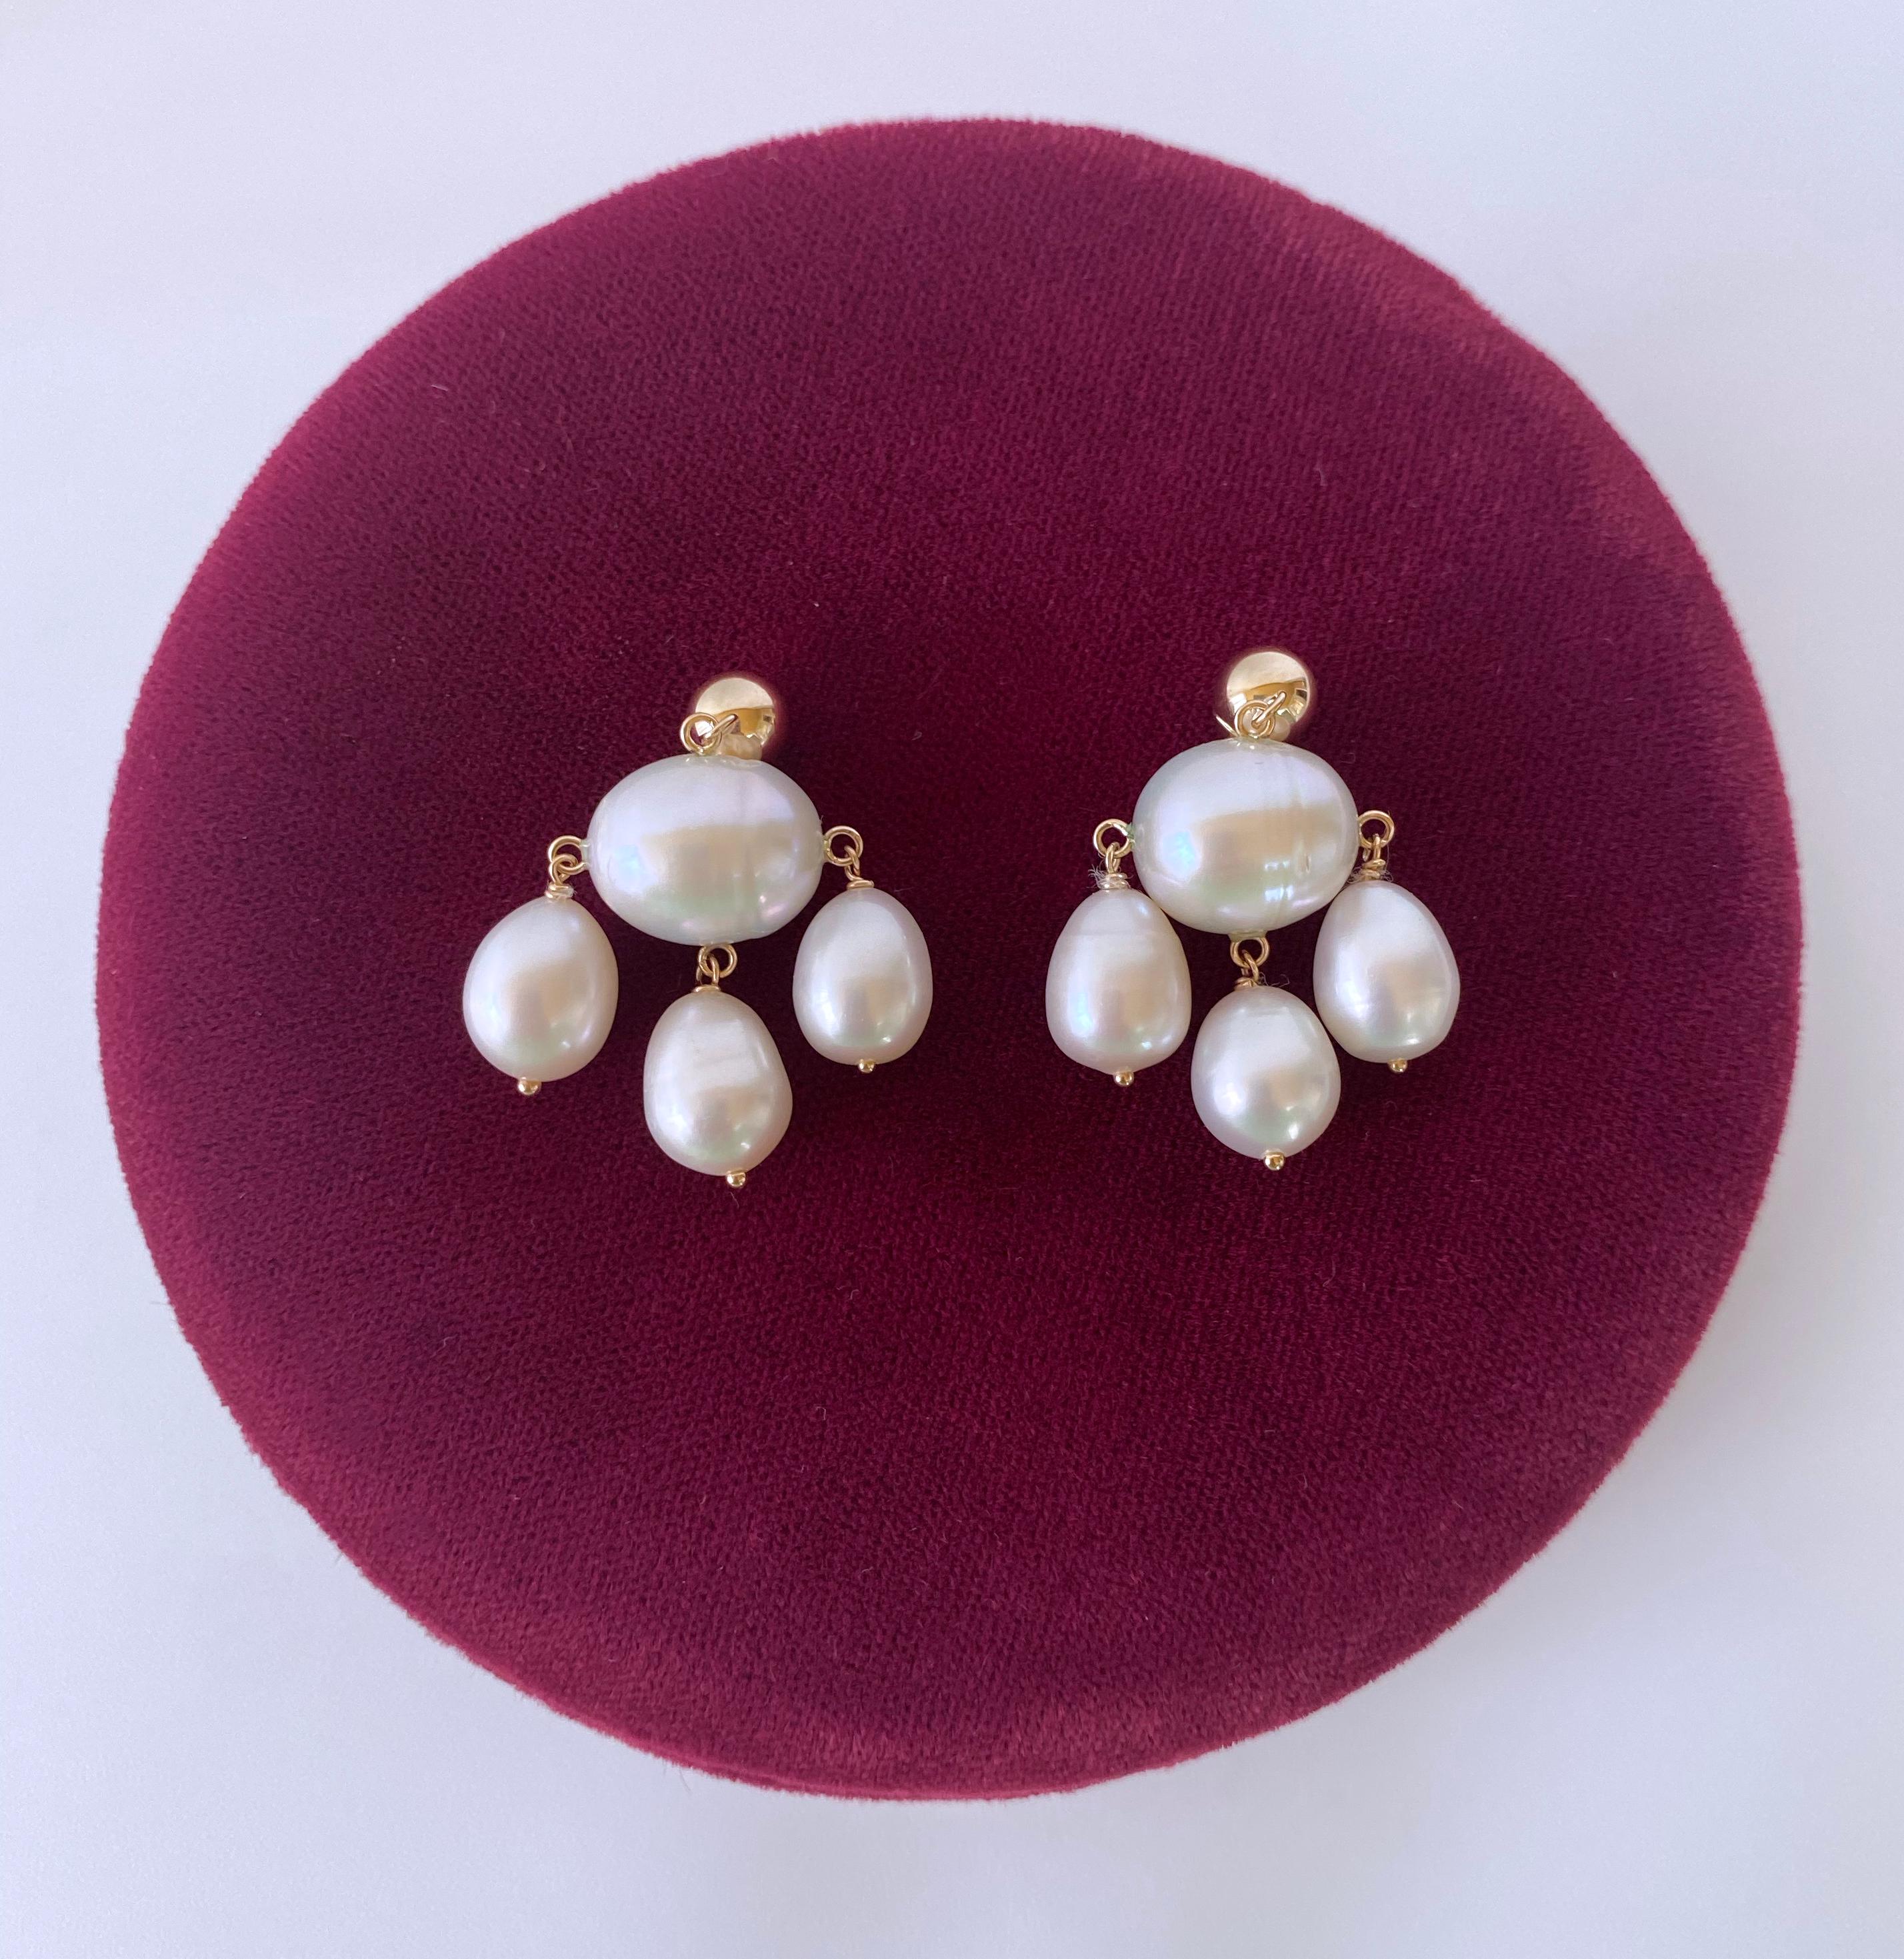 Gorgeous pair of chandelier handmade earrings by Marina J. This lovely pair feature high luster white Pearls that display beautiful hues of different colors when hit with light. A large Baroque Oval Pearl hangs in the middle, from which three